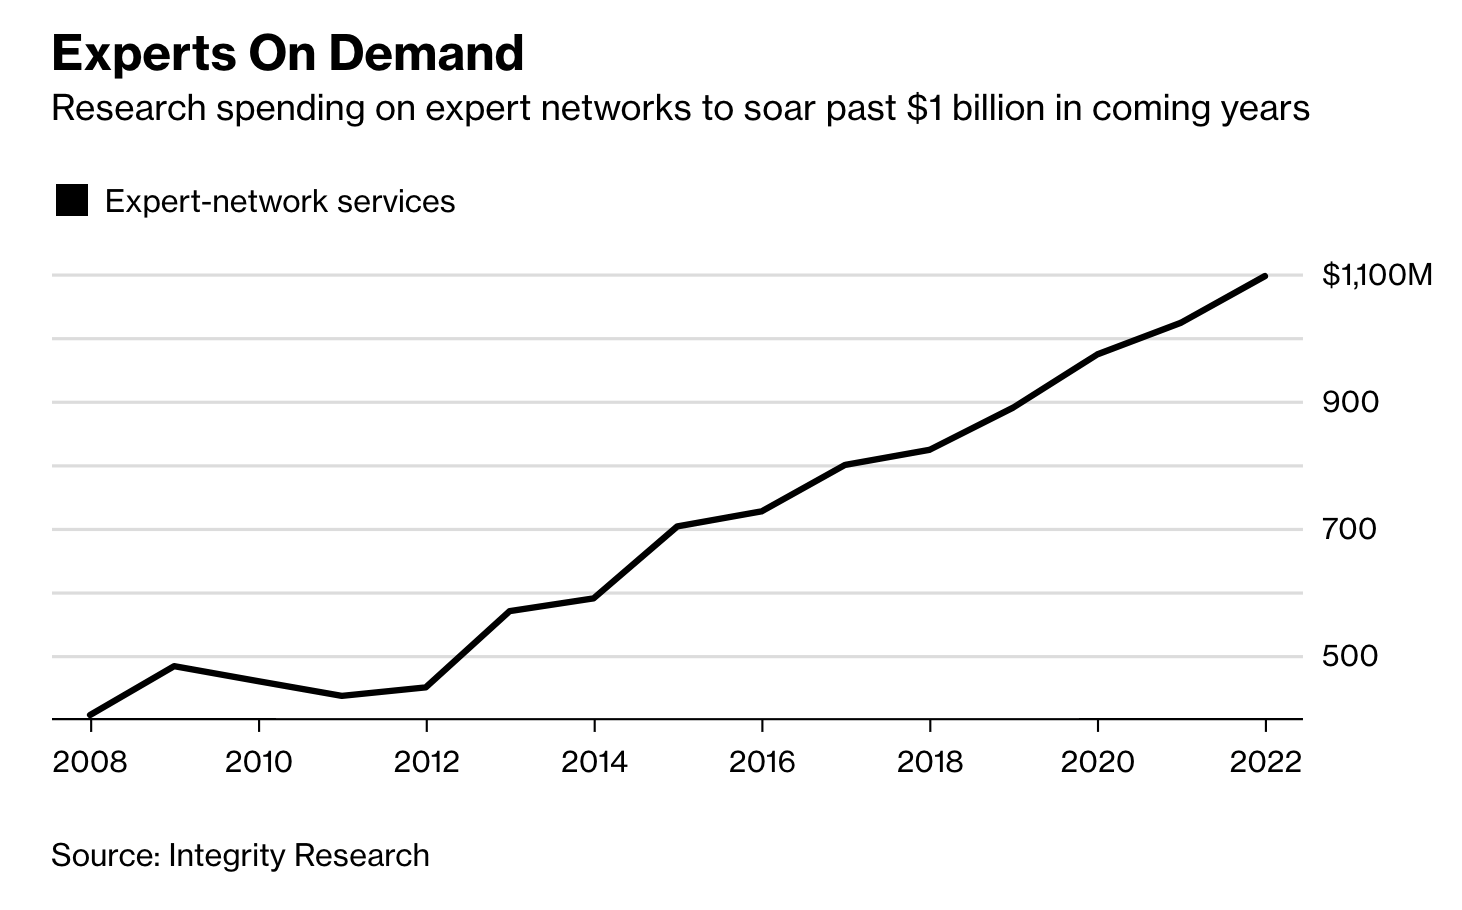 Research spending on expert networks soars past $1 billions in the coming years